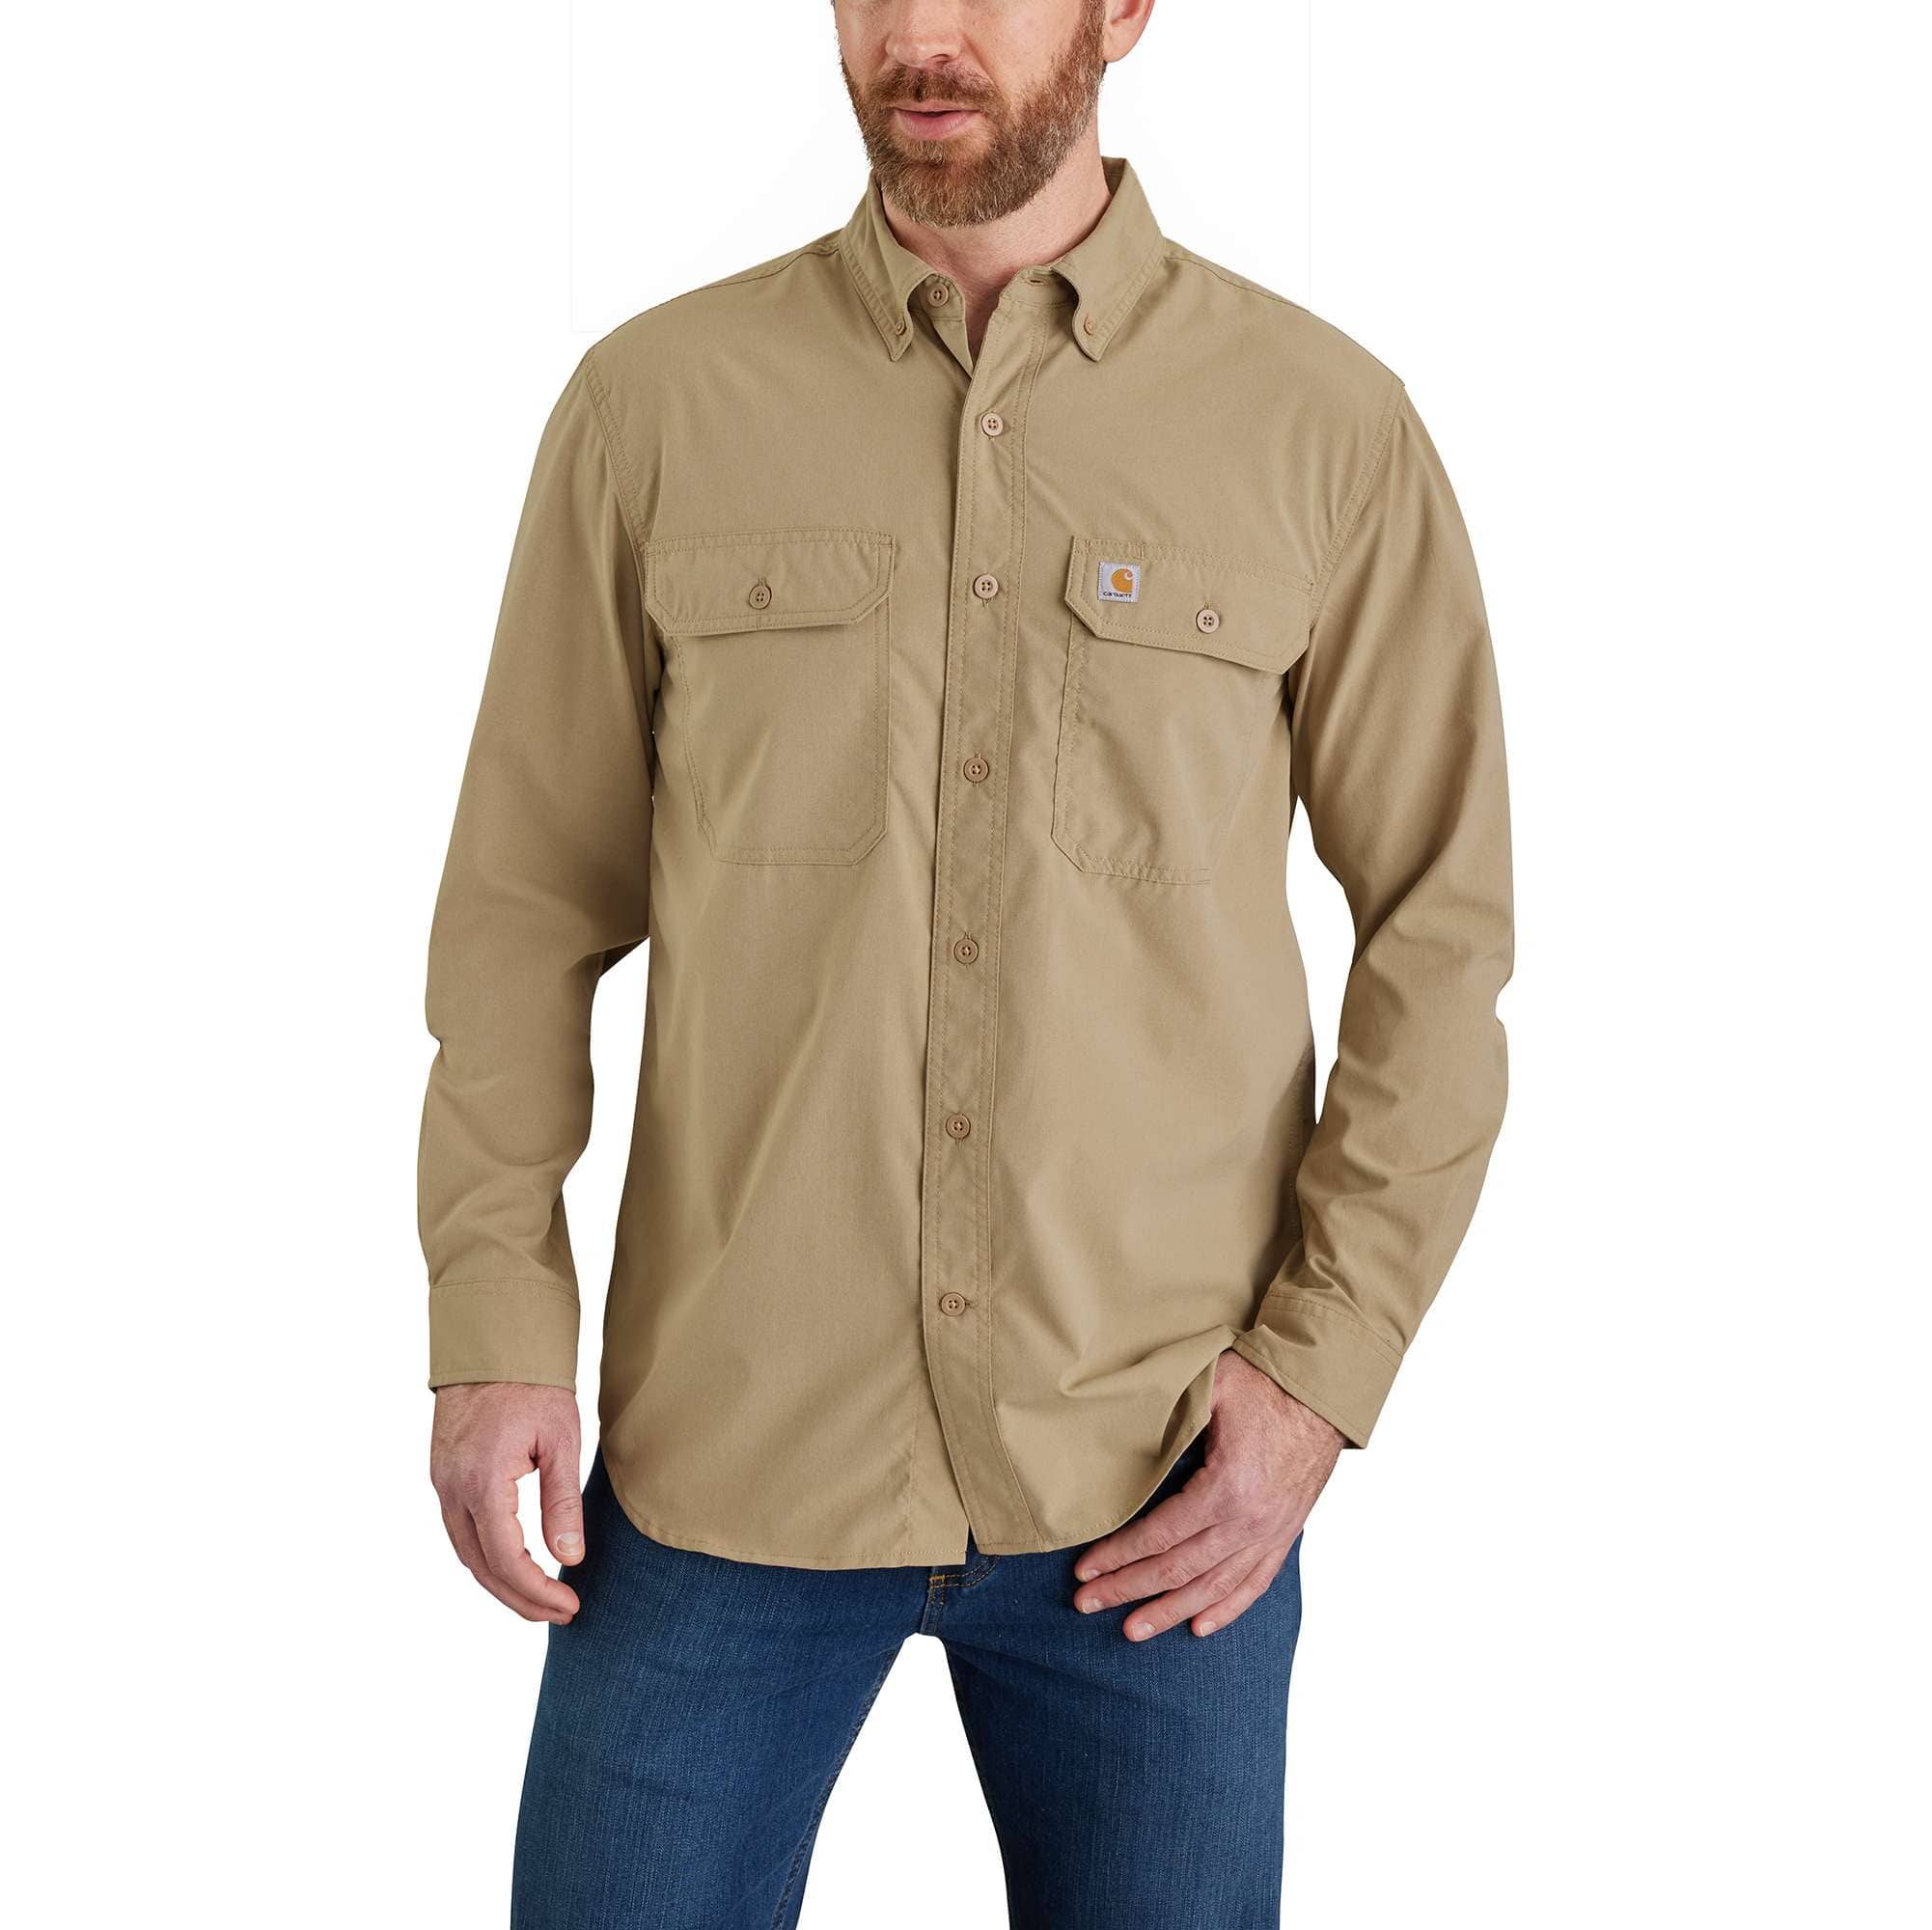 Universal Overall  Striped Long Sleeved Industrial Work Shirts for Men